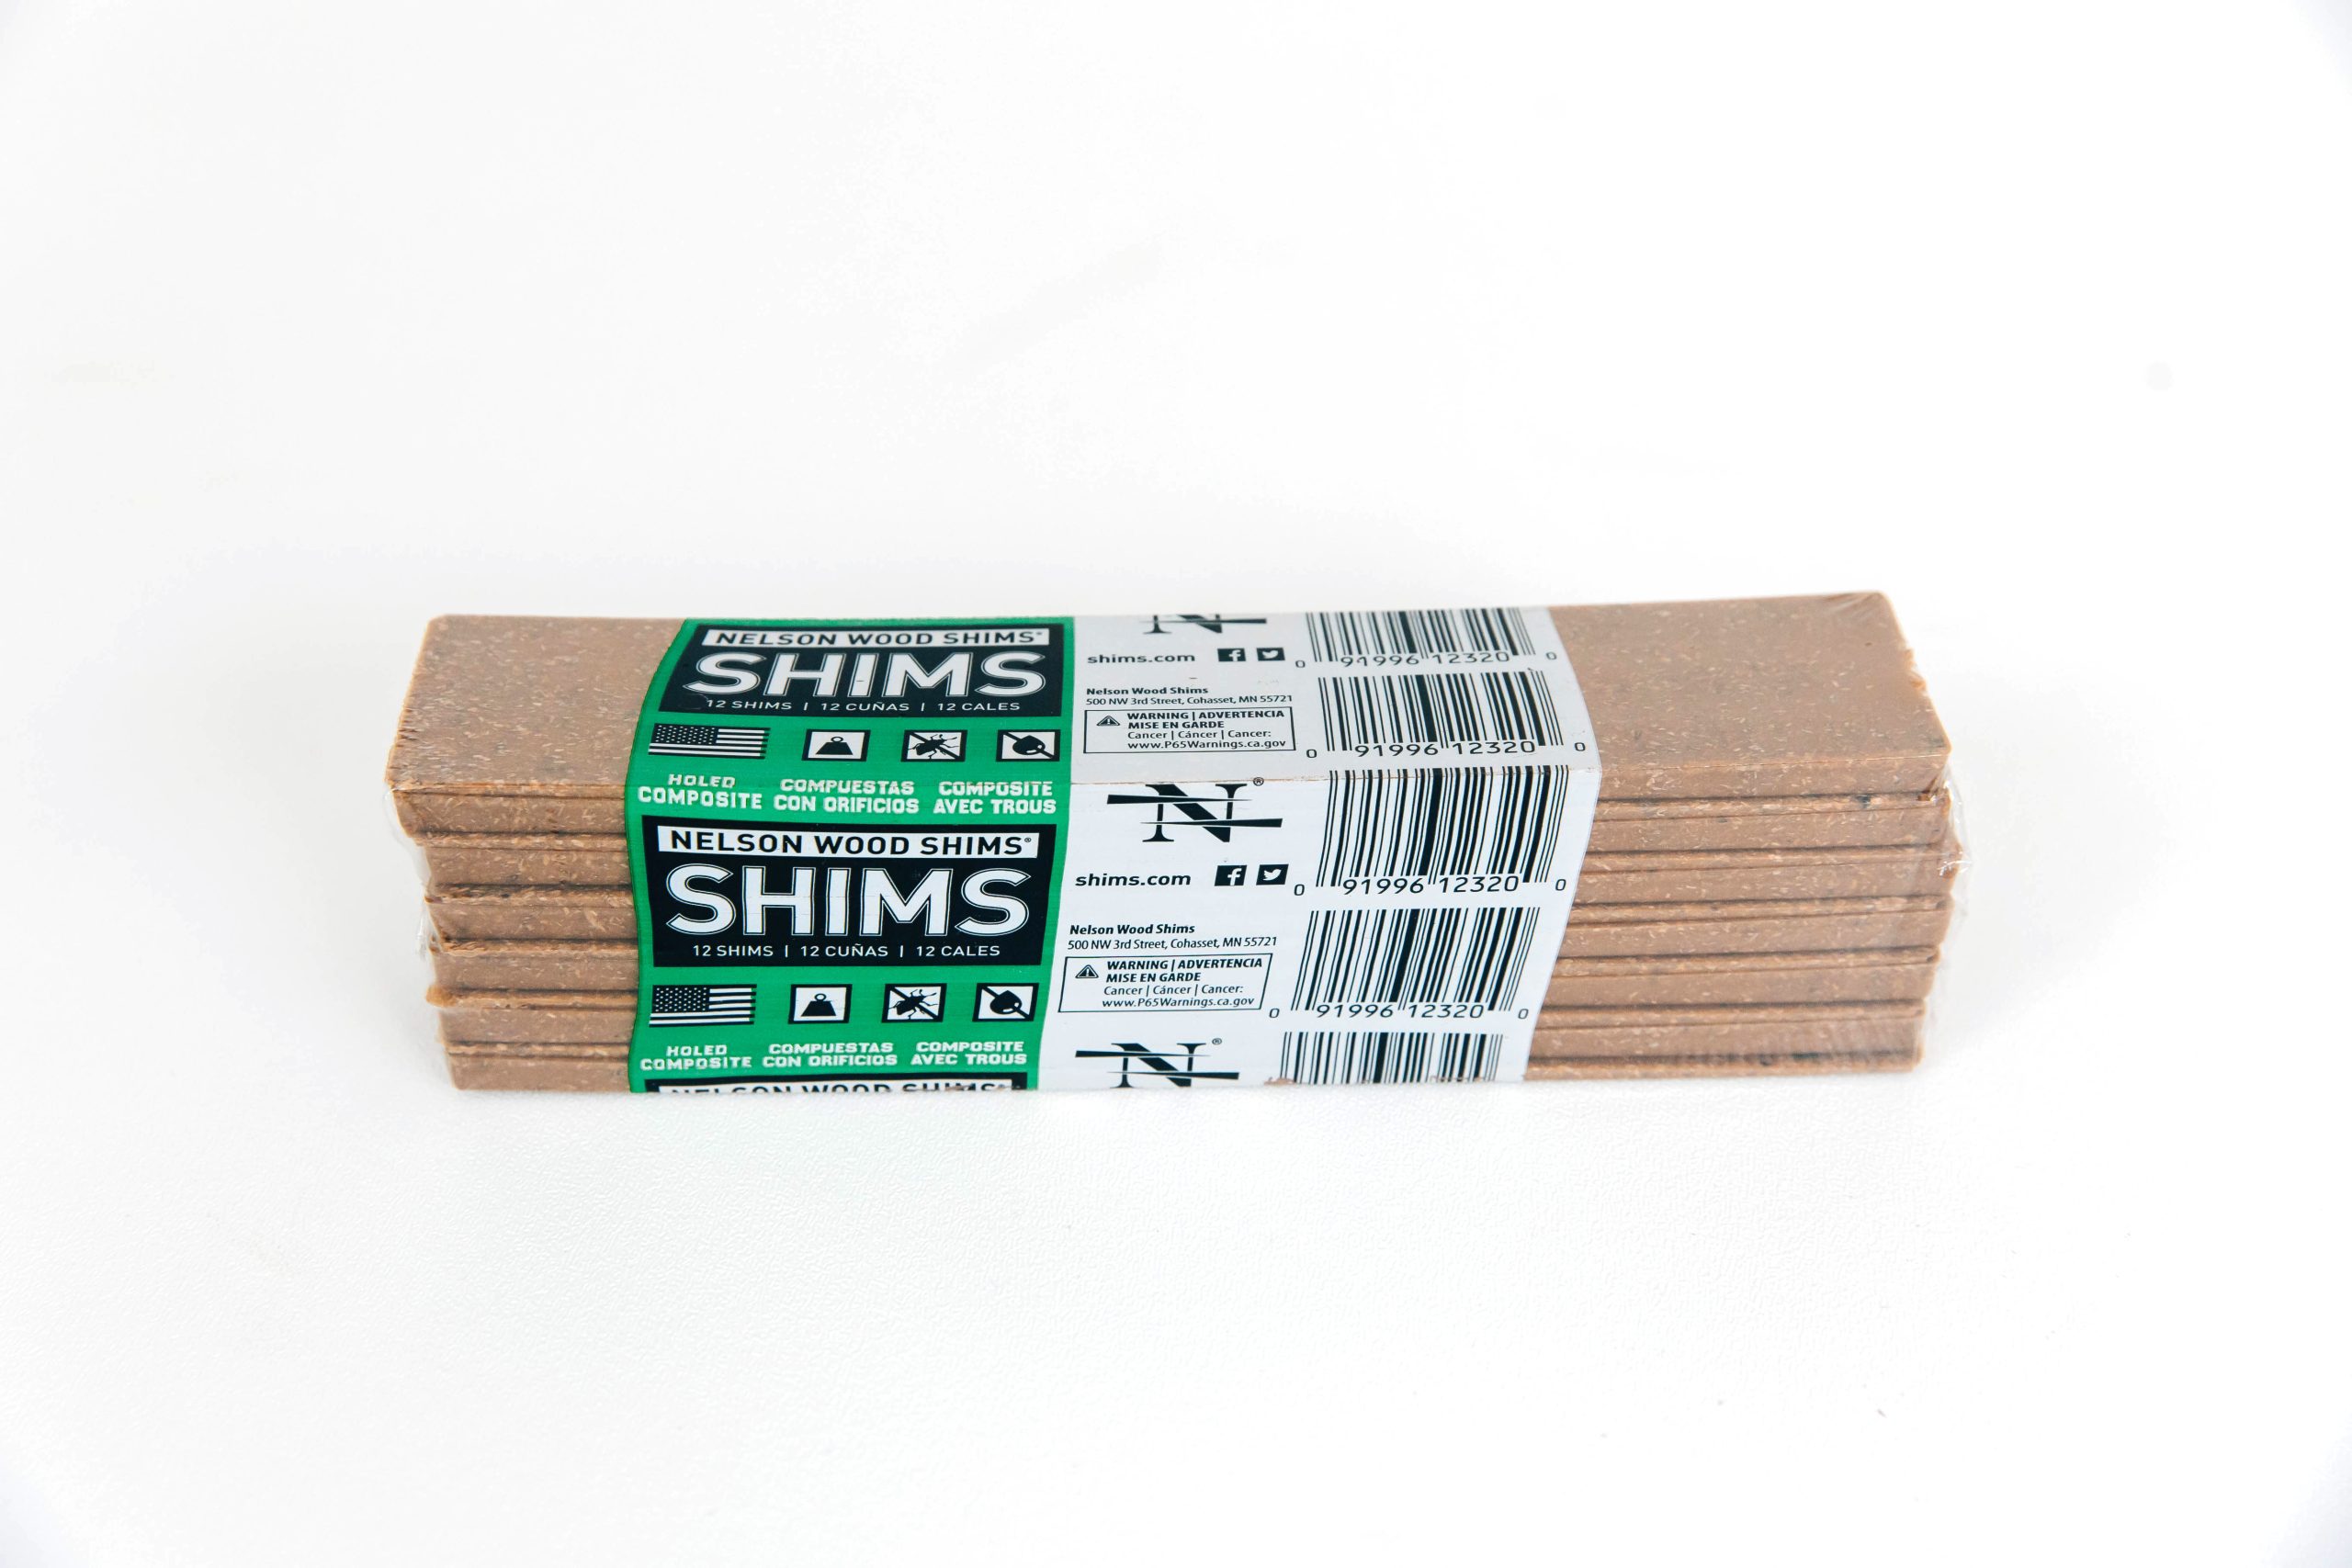 Wood Shims 12-count, 1-3/8 x 7-3/8